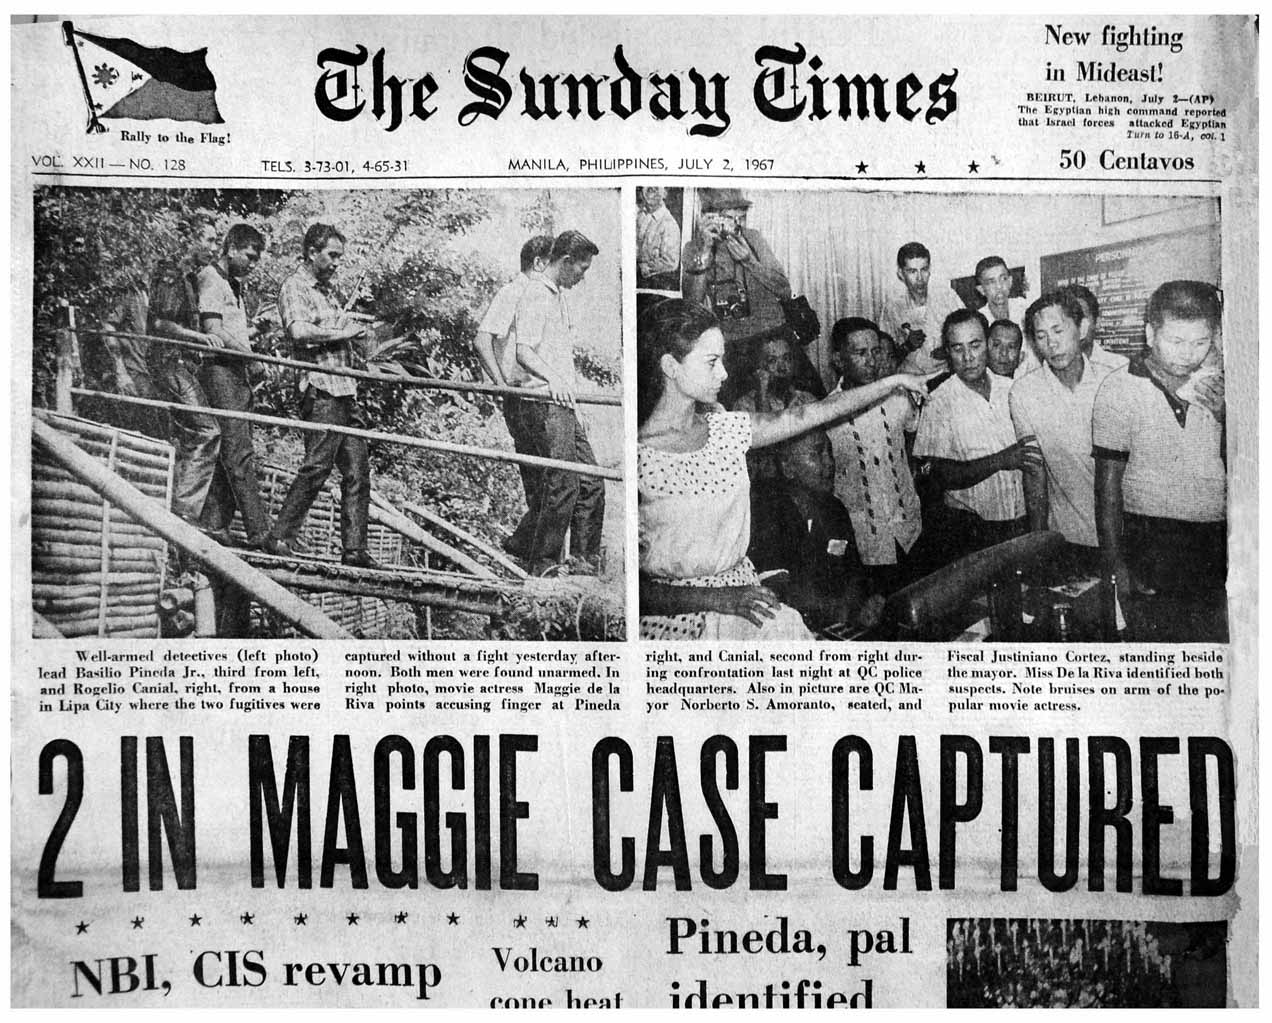 Old issue of the Manila Times, Sunday edition